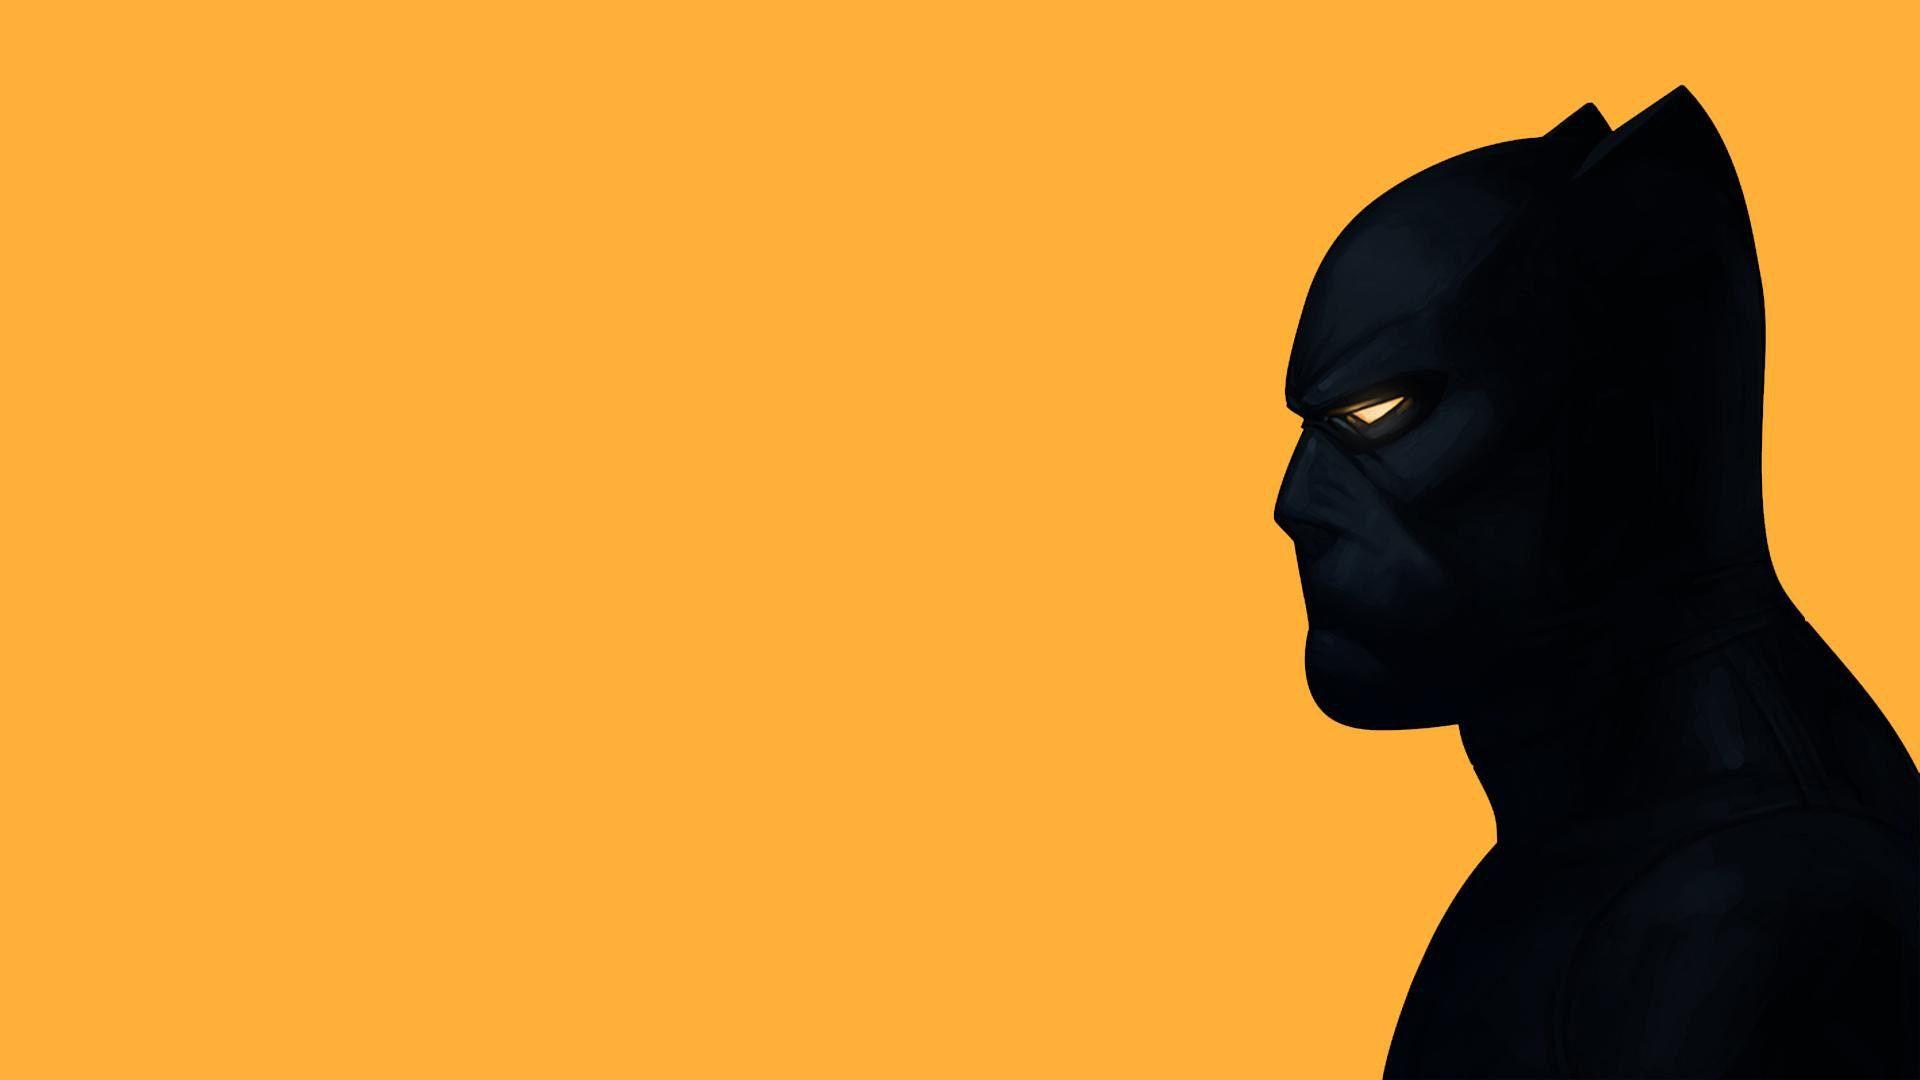 Art, Black Panther (Character), Marvel, Mike Mitchell HD Wallpaper